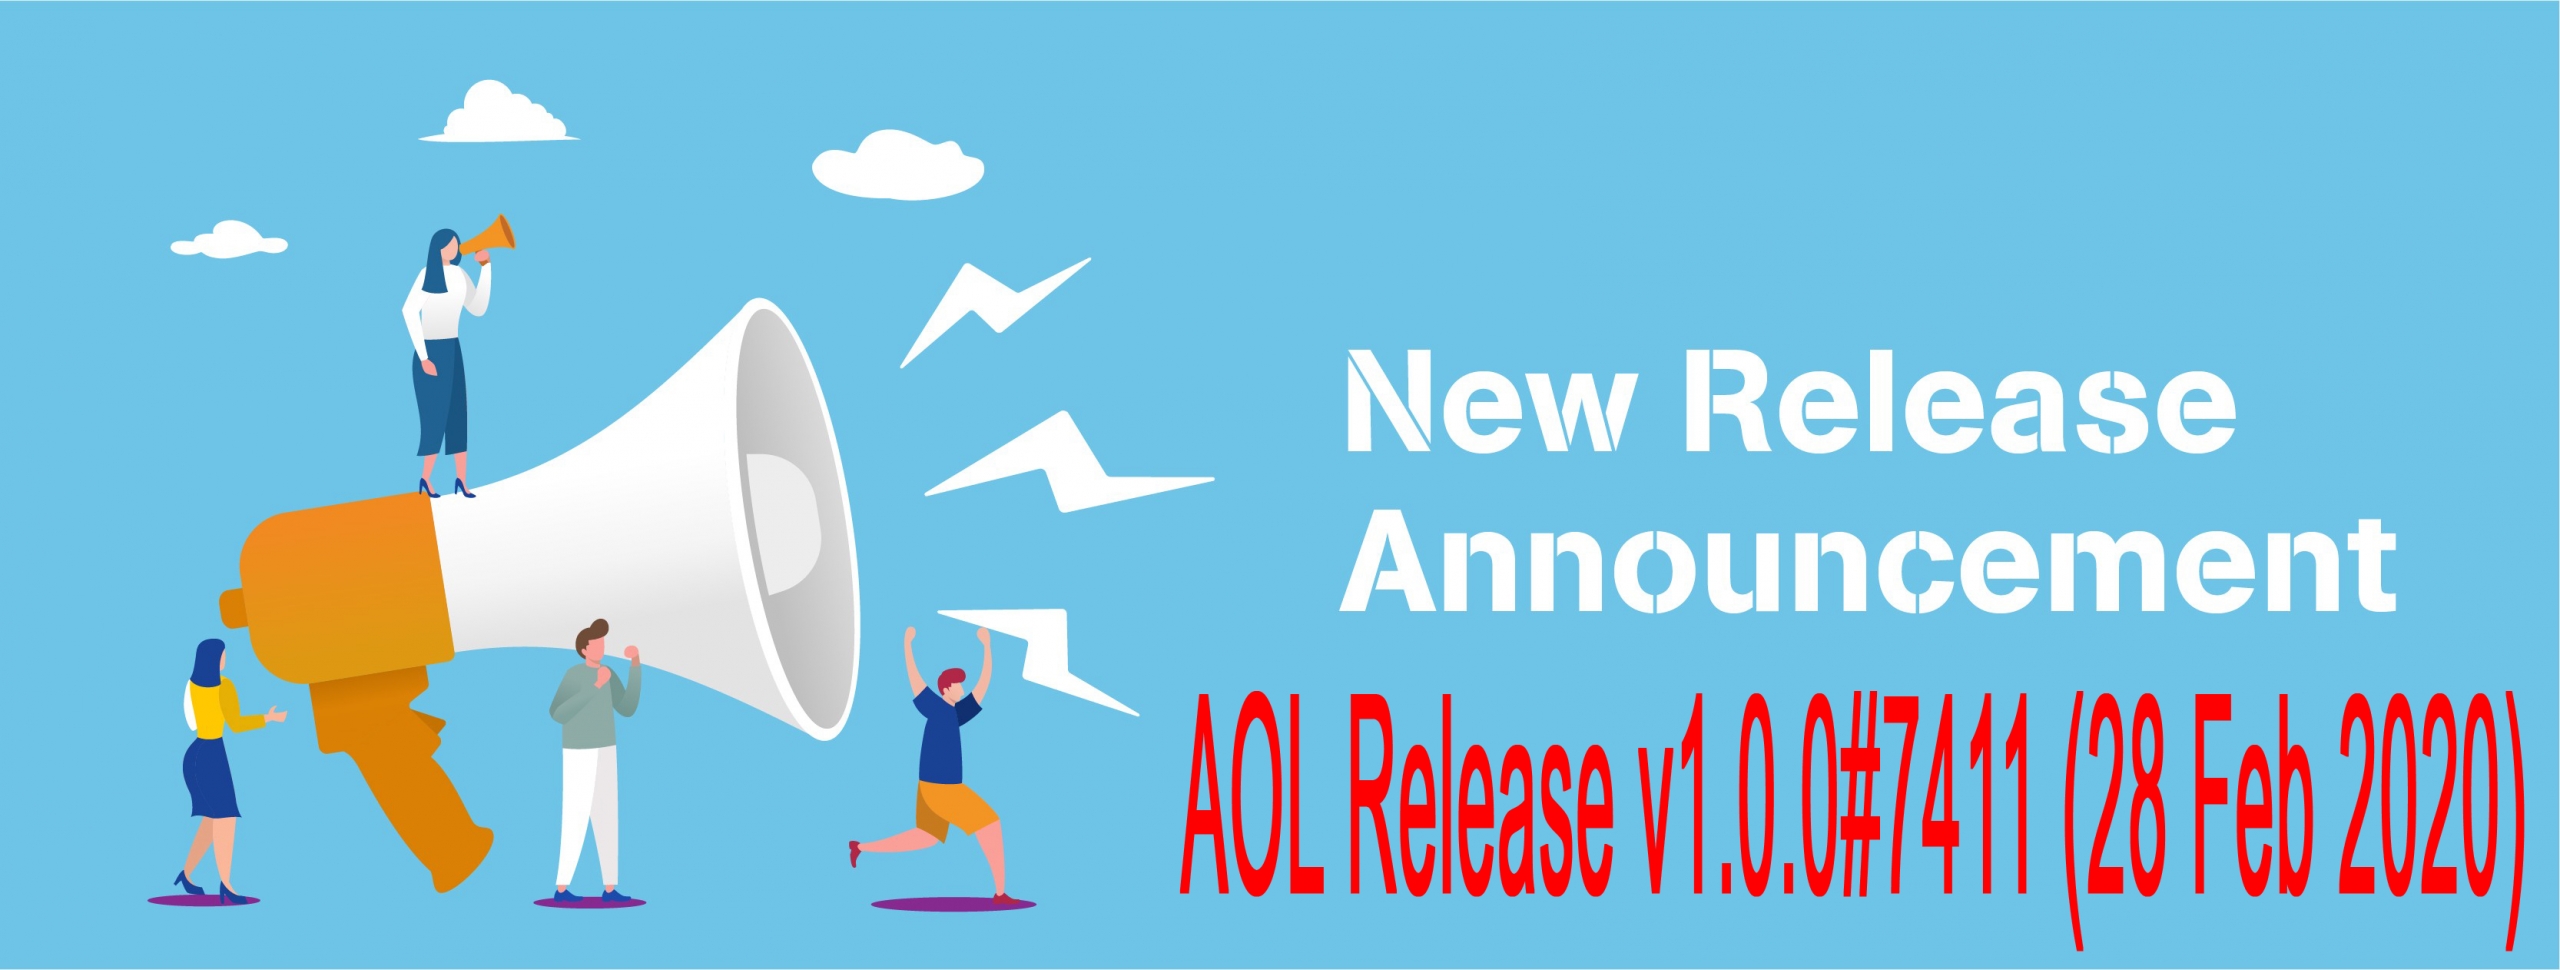 Accurate Online Release v1.0.0#7411 (28 Feb 2020)